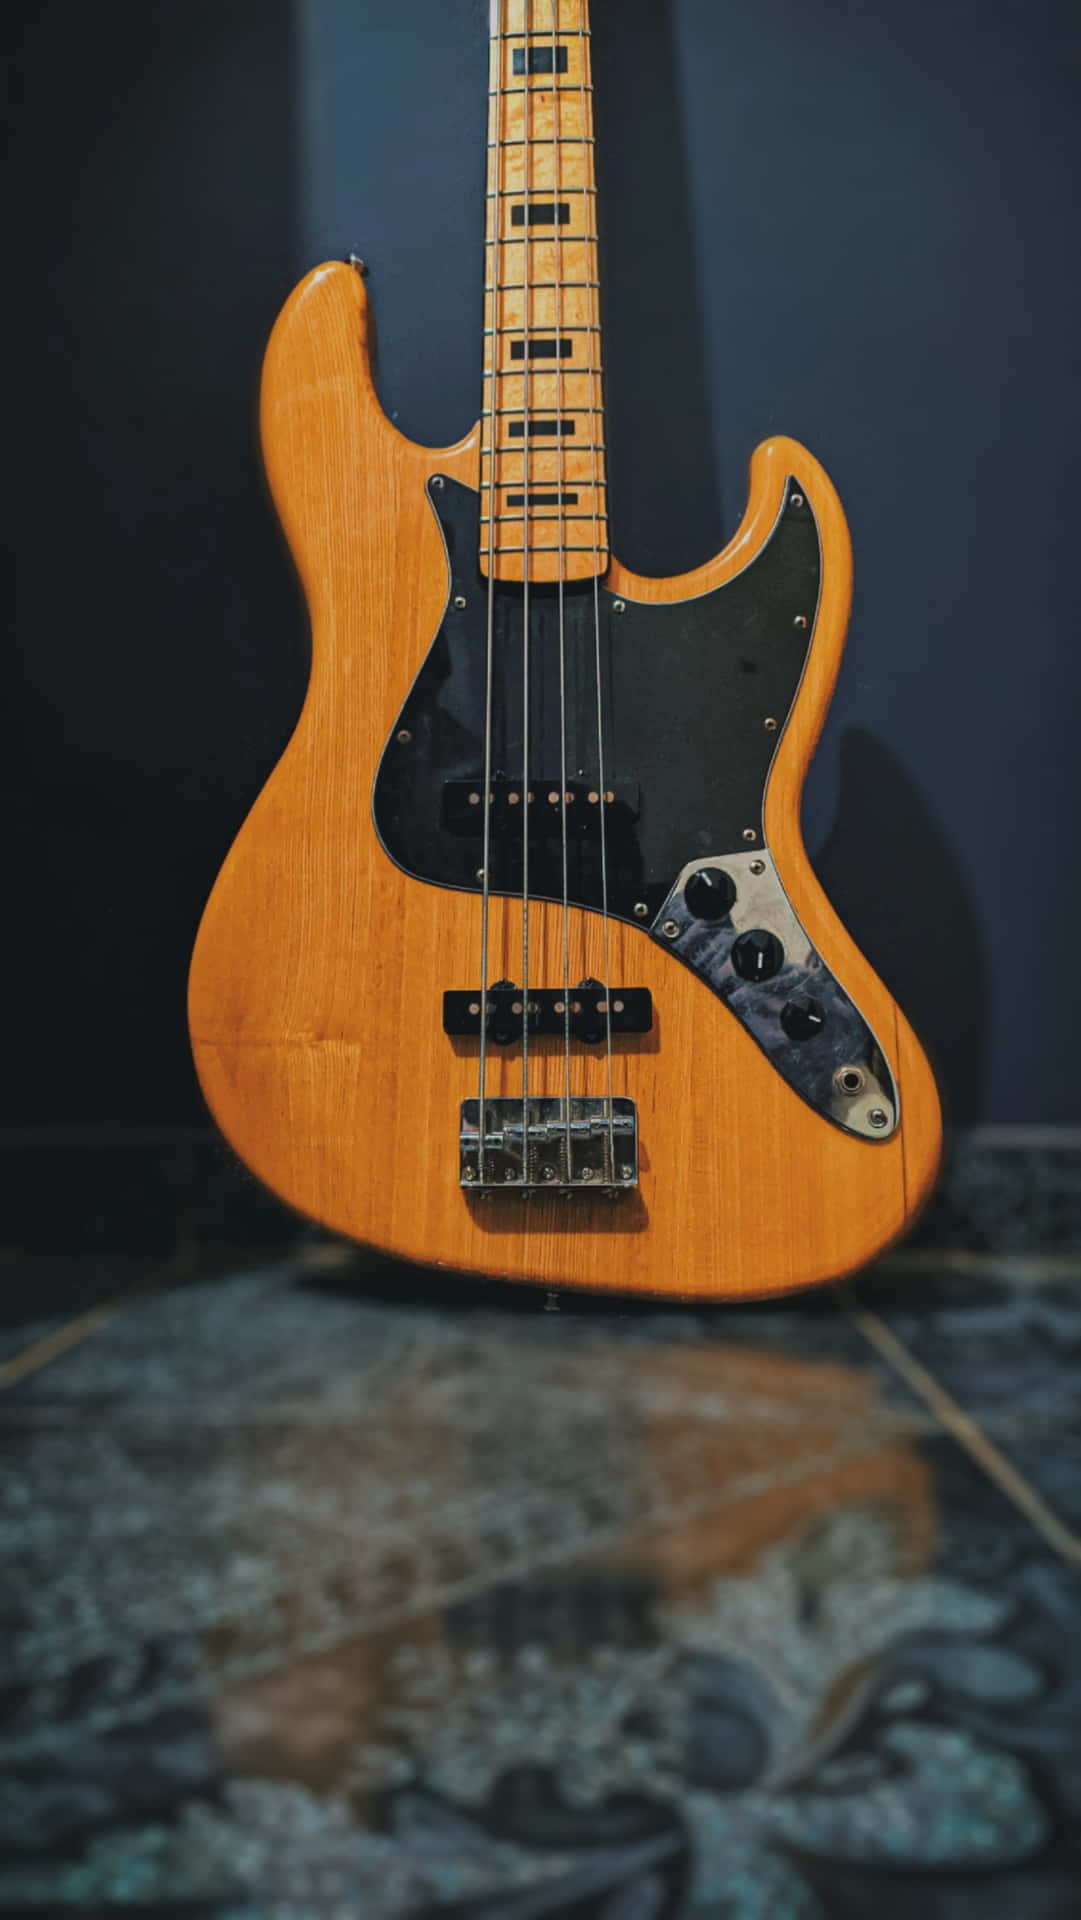 An iconic bass guitar with gorgeous detail. Wallpaper